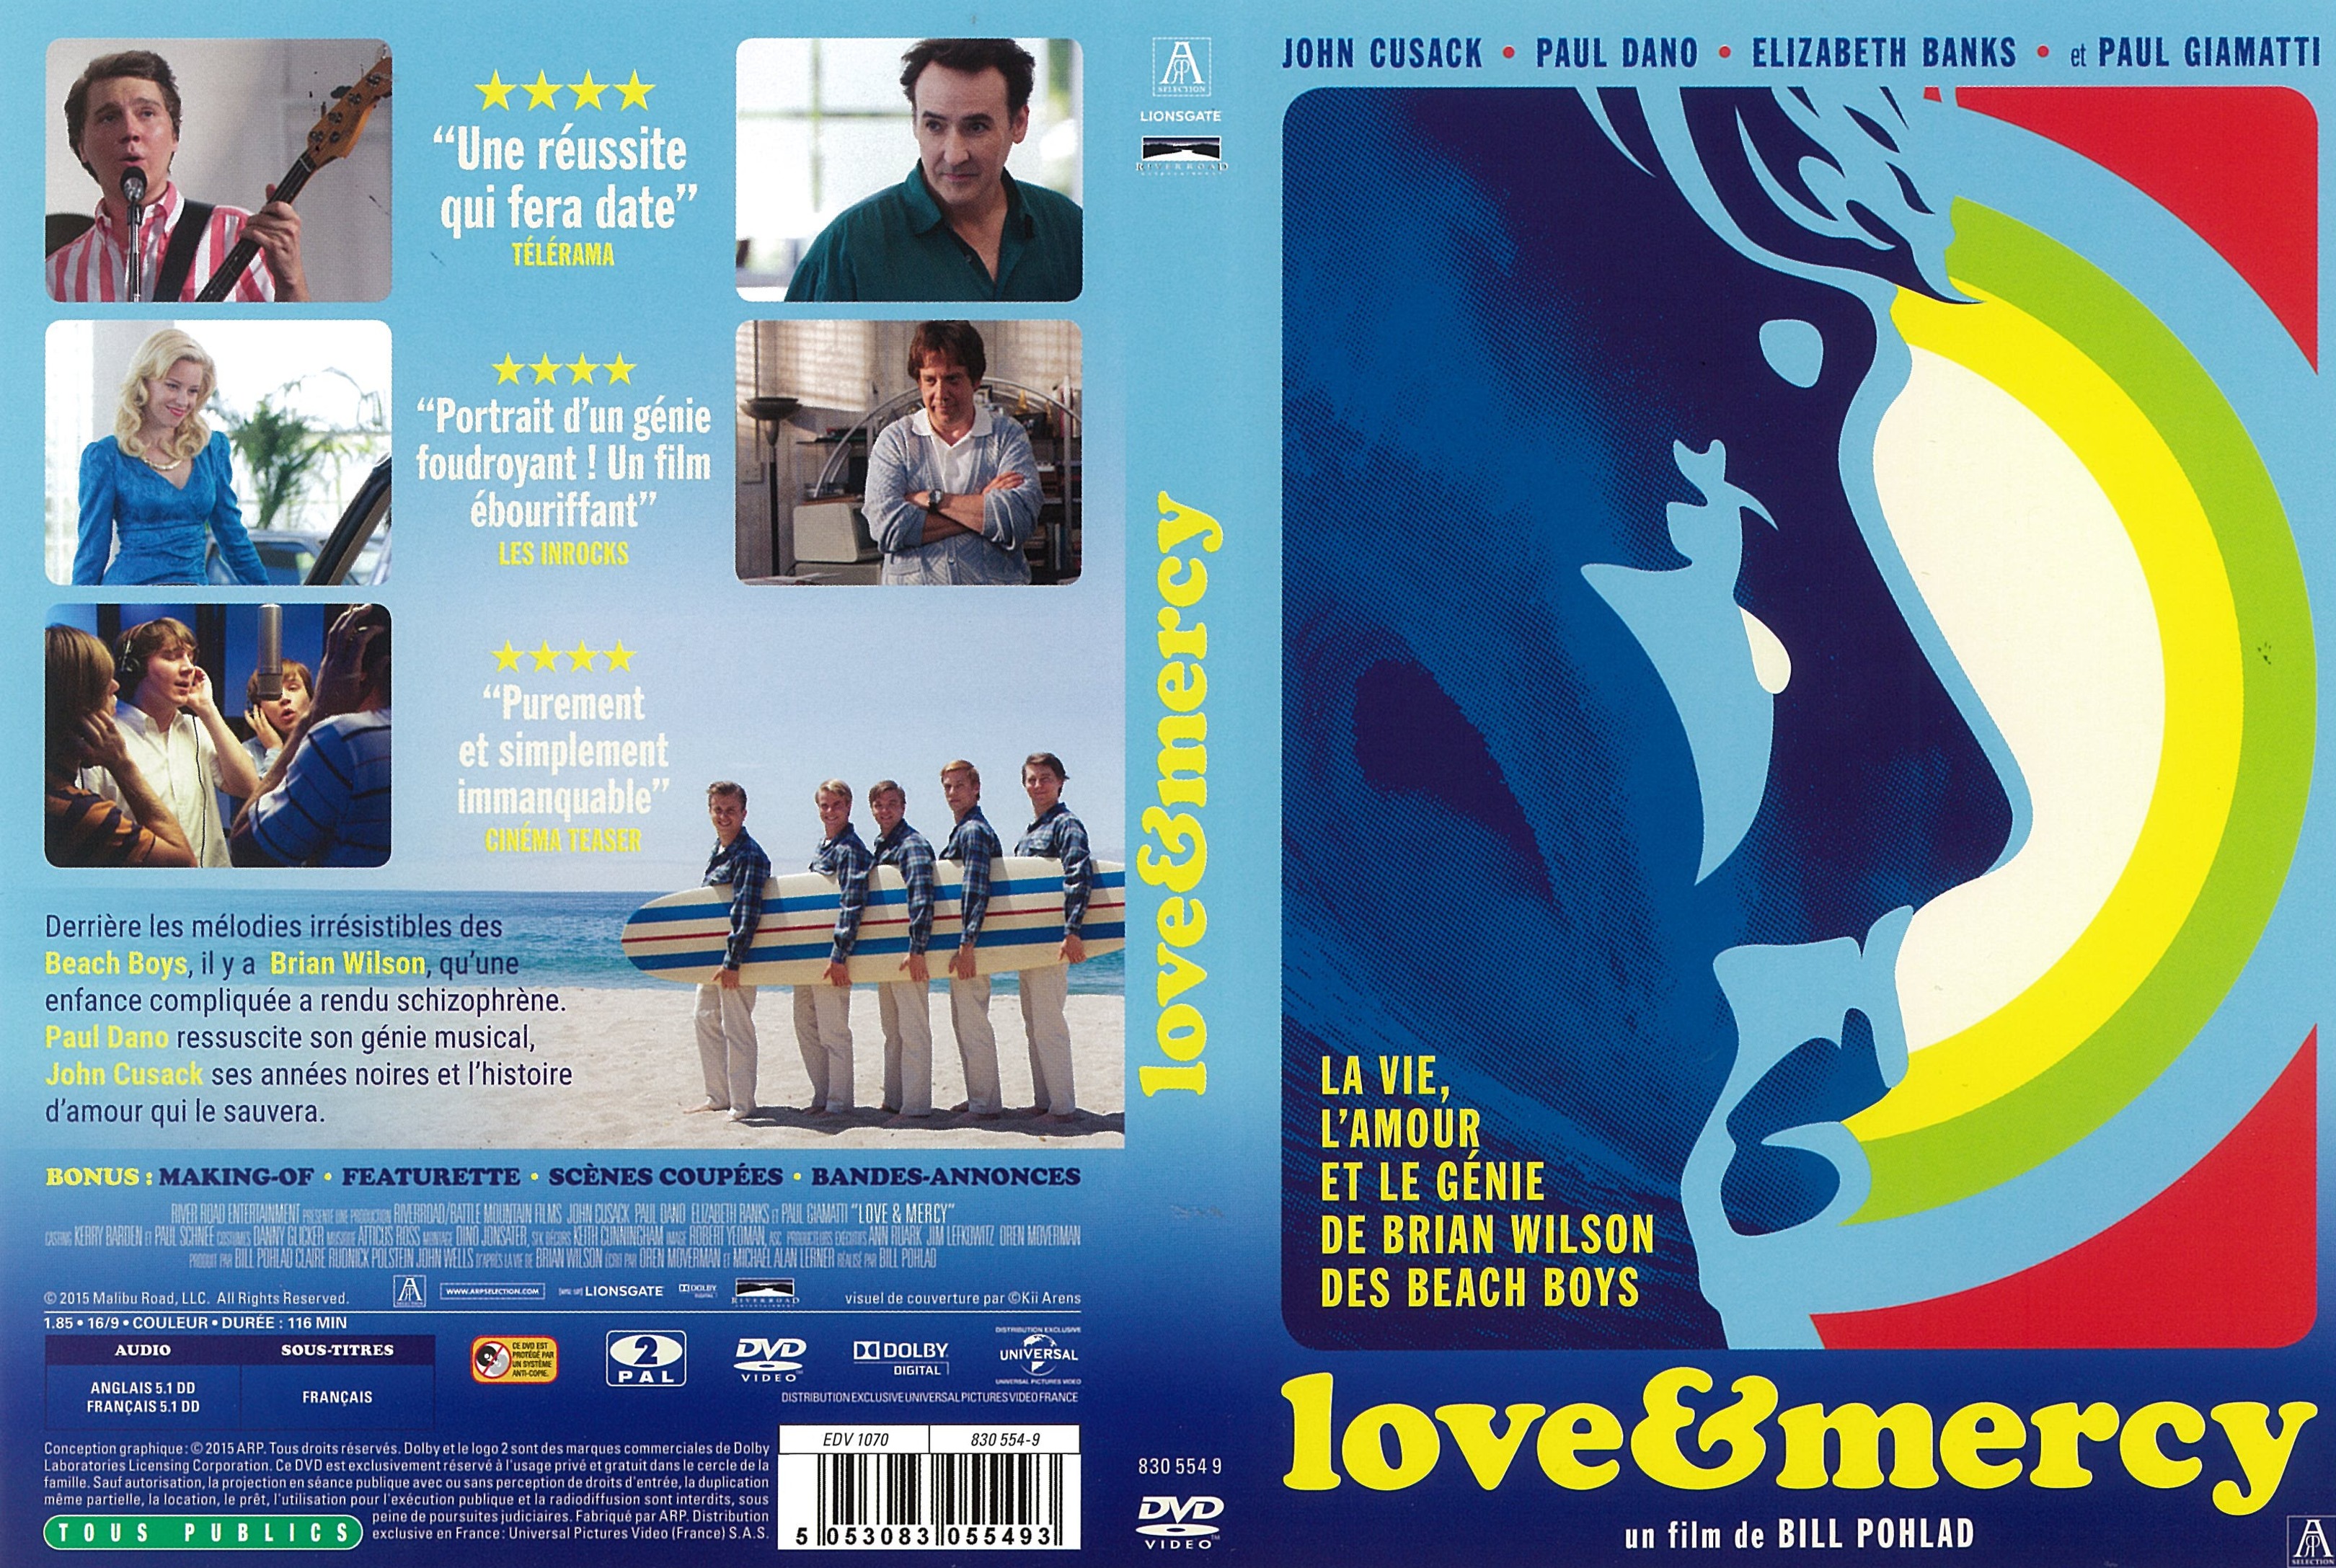 Jaquette DVD Love & Mercy